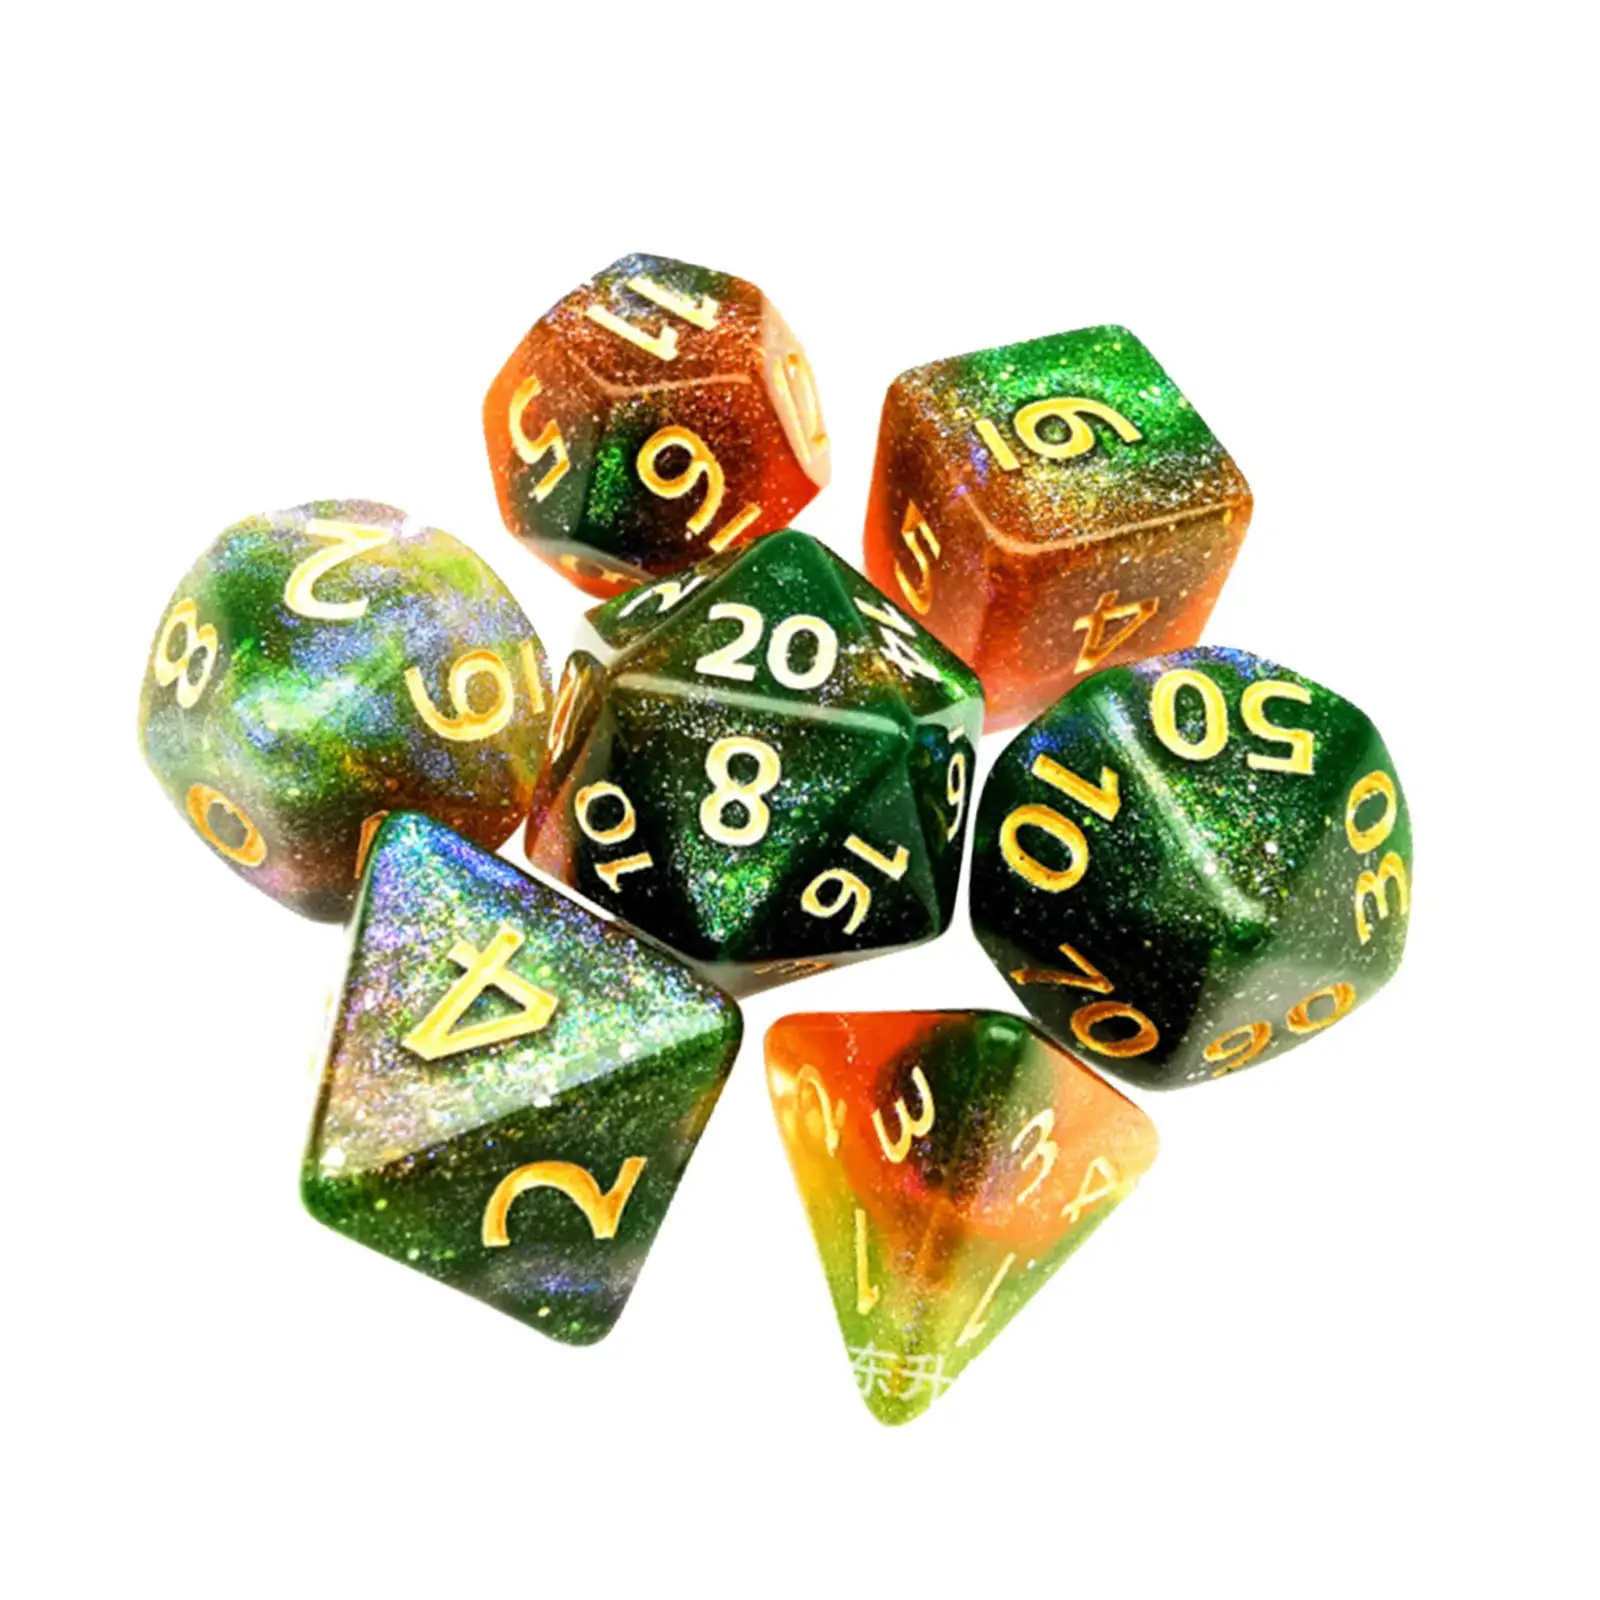 7 Die Polyhedral Dices Set D4-D20 Party Toys for MTG RPG Role Playing Table Games Math Teaching